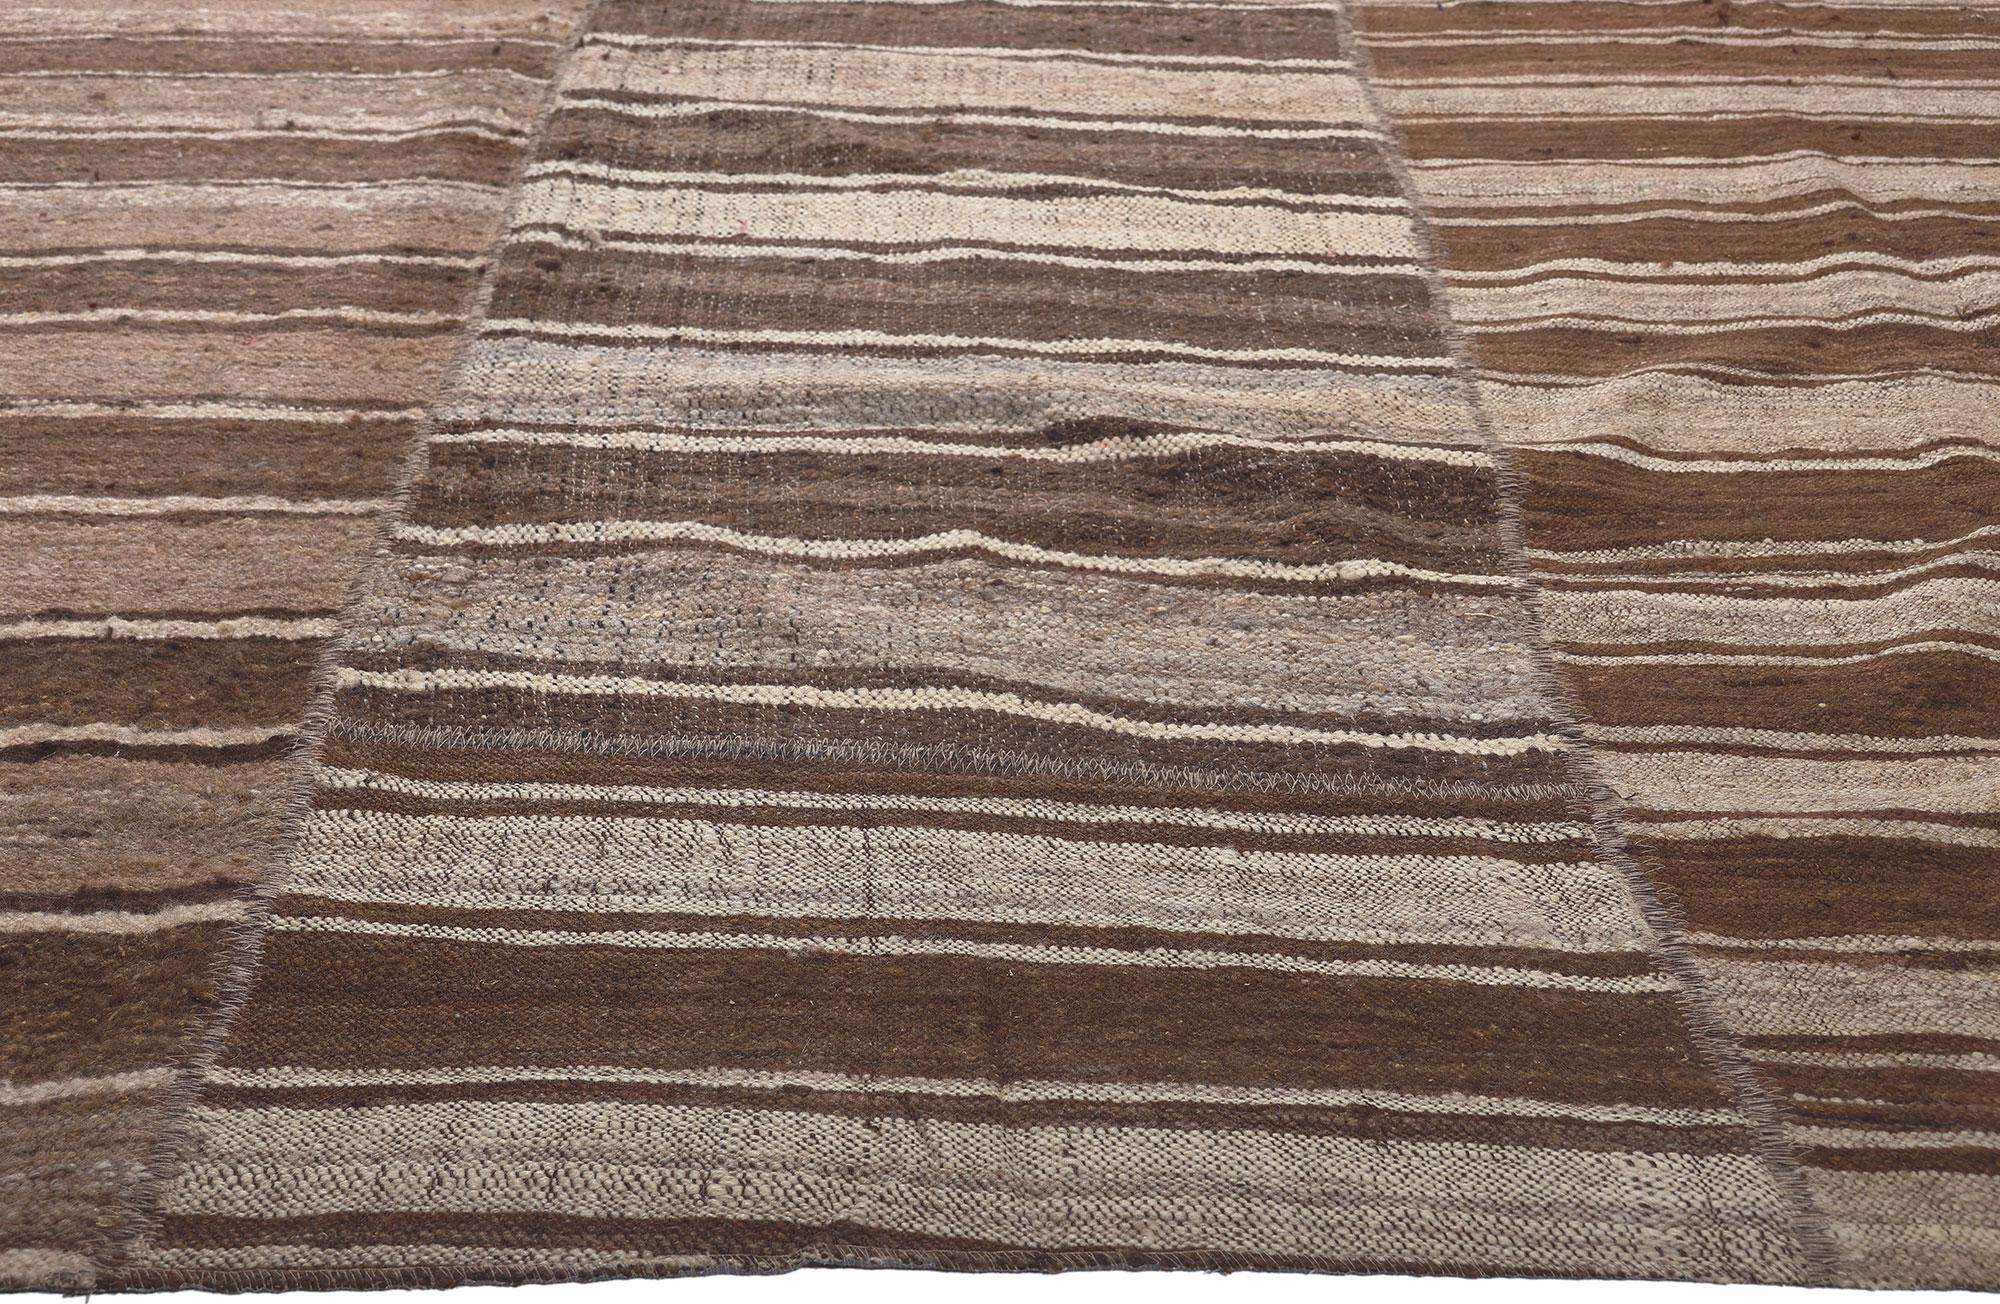 Earth-Tone Vintage Turkish Kilim Rug, Wabi-Sabi Embraces Sustainable Design In Good Condition For Sale In Dallas, TX